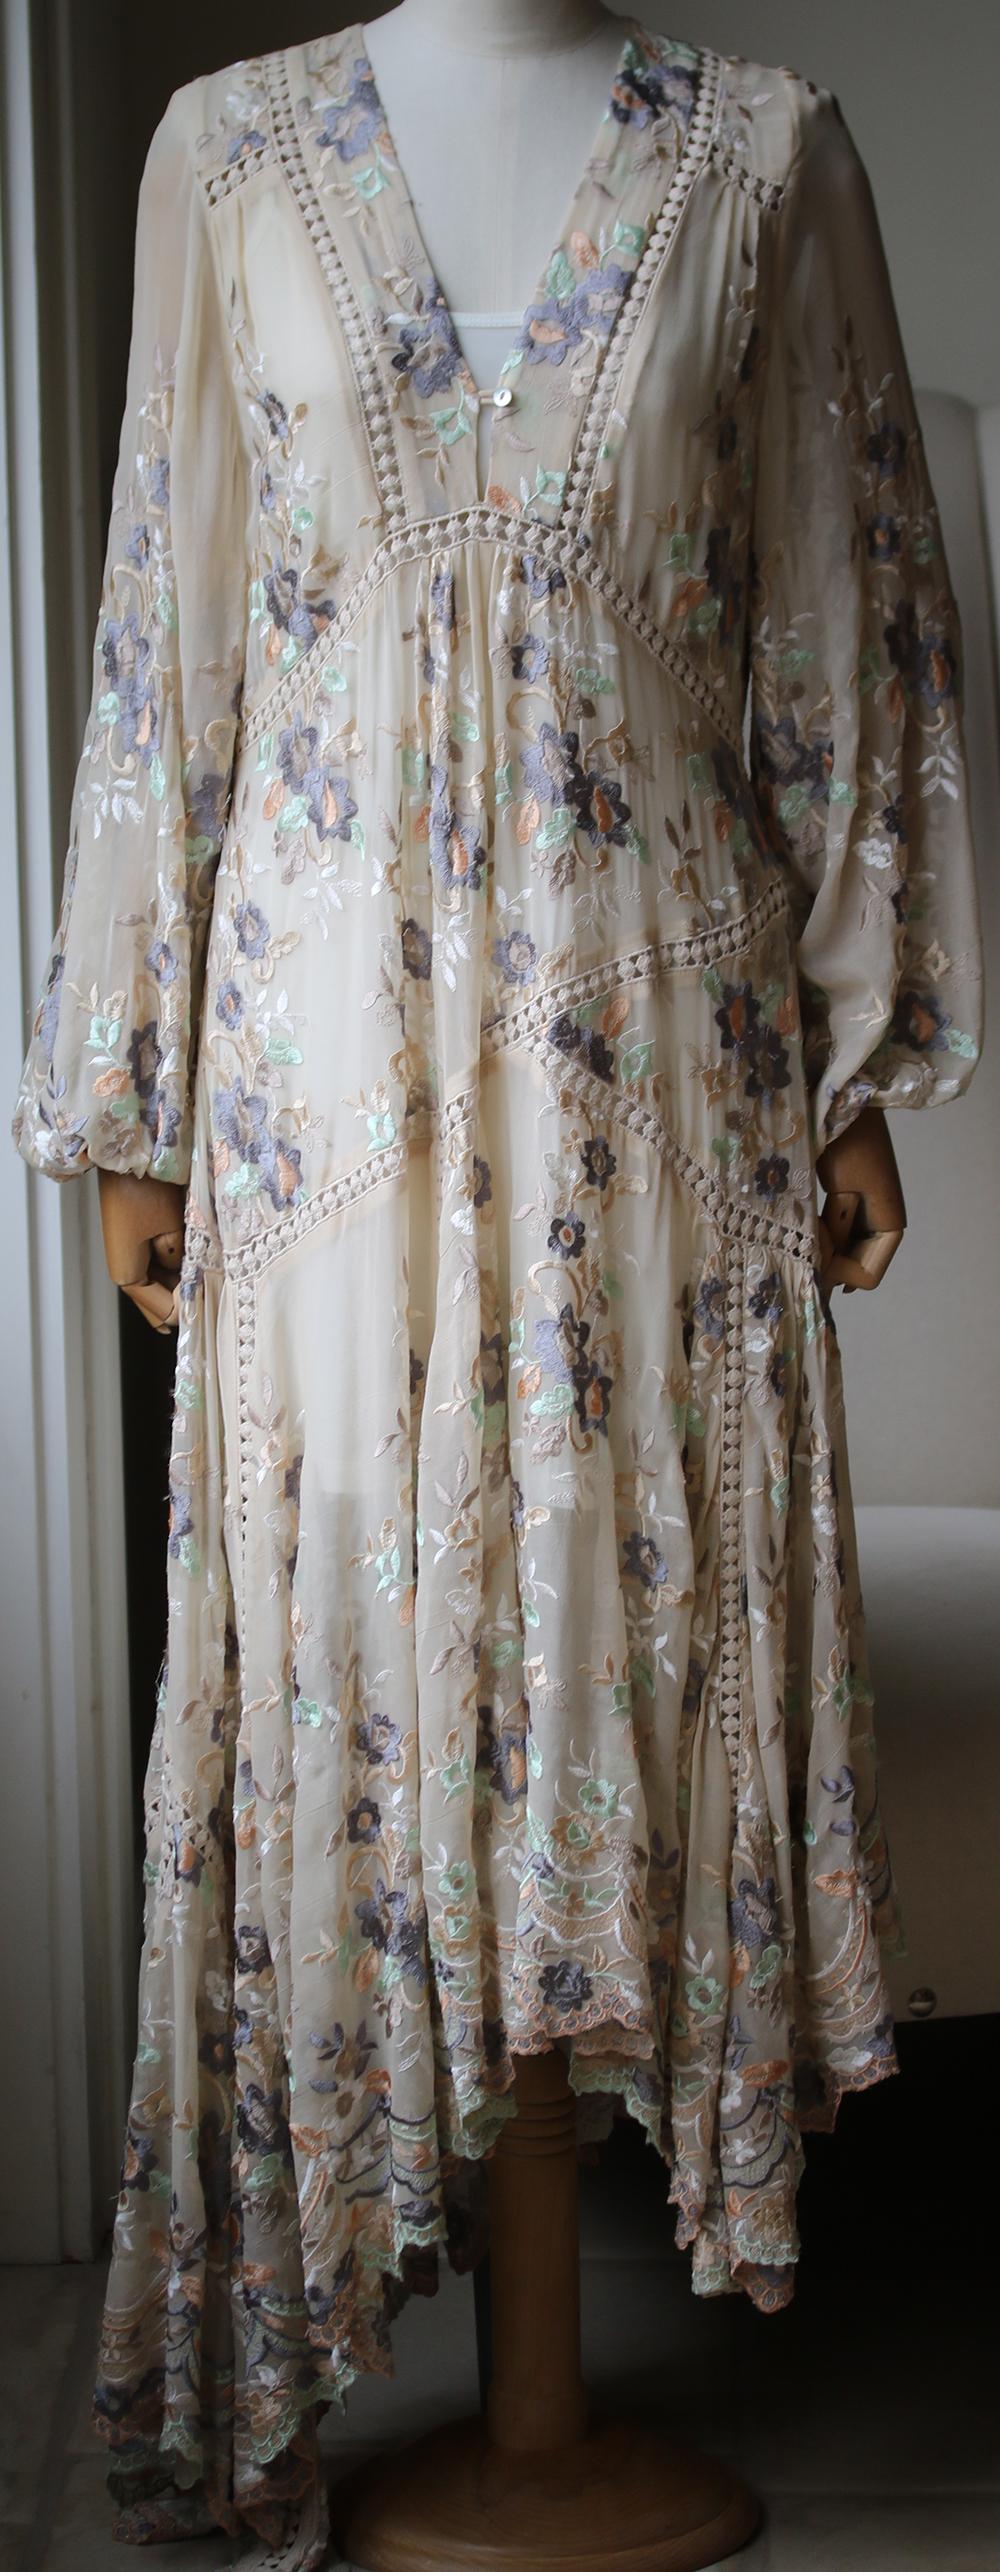 Constructed from cotton embroidered silk georgette, Zimmermann's Anais Antique dress casts a beautiful, billowing bohemian silhouette. The relaxed fit is exquisitely detailed with delicate floral embroidery and a breezy scalloped hem – perfect for